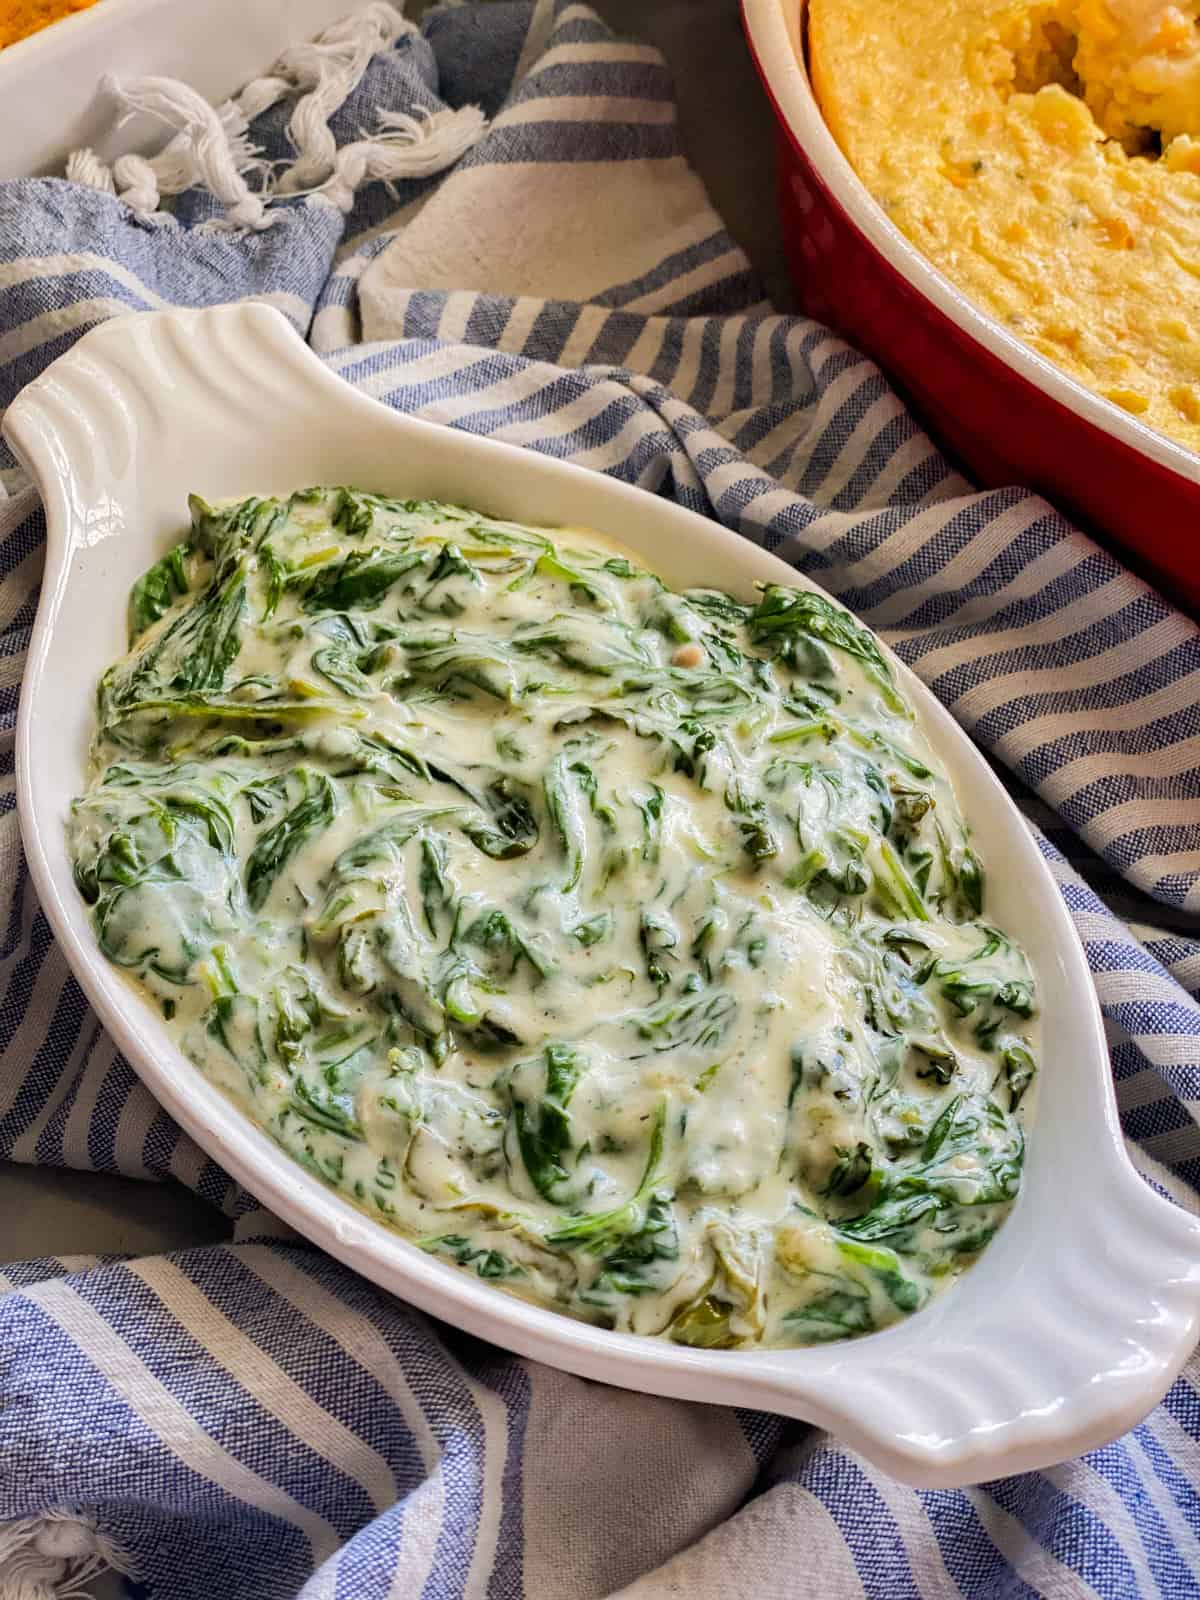 Oval baking dish with creamed spinach on a blue and white striped cloth.